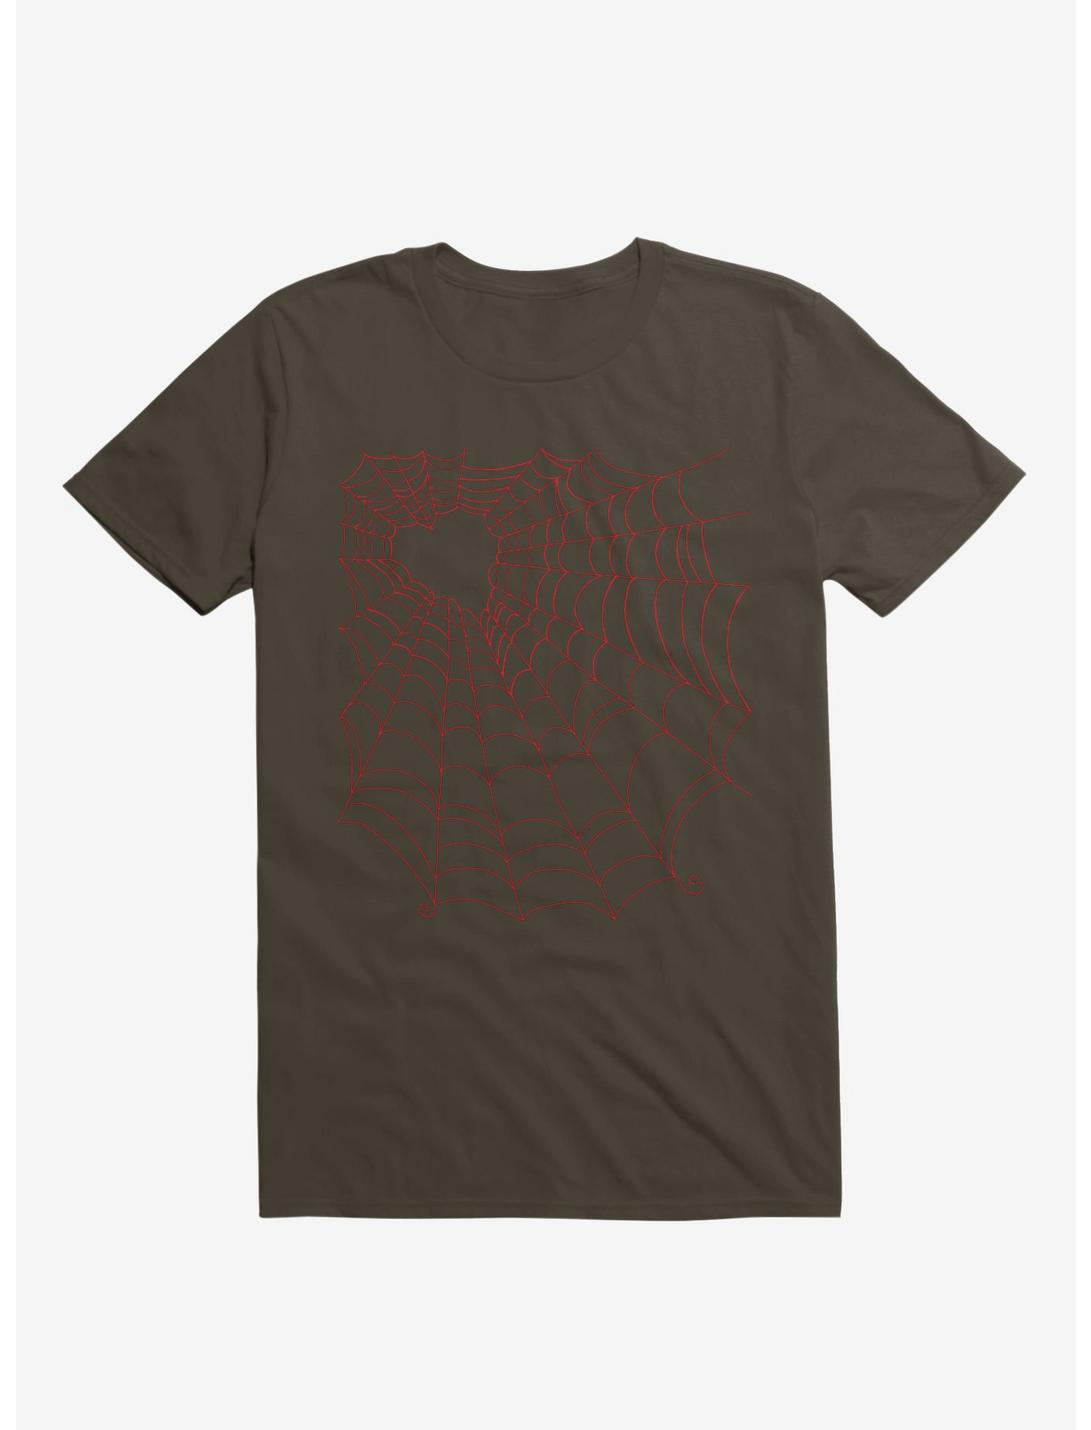 Caught You In My Red Hearted Web Brown T-Shirt, BROWN, hi-res